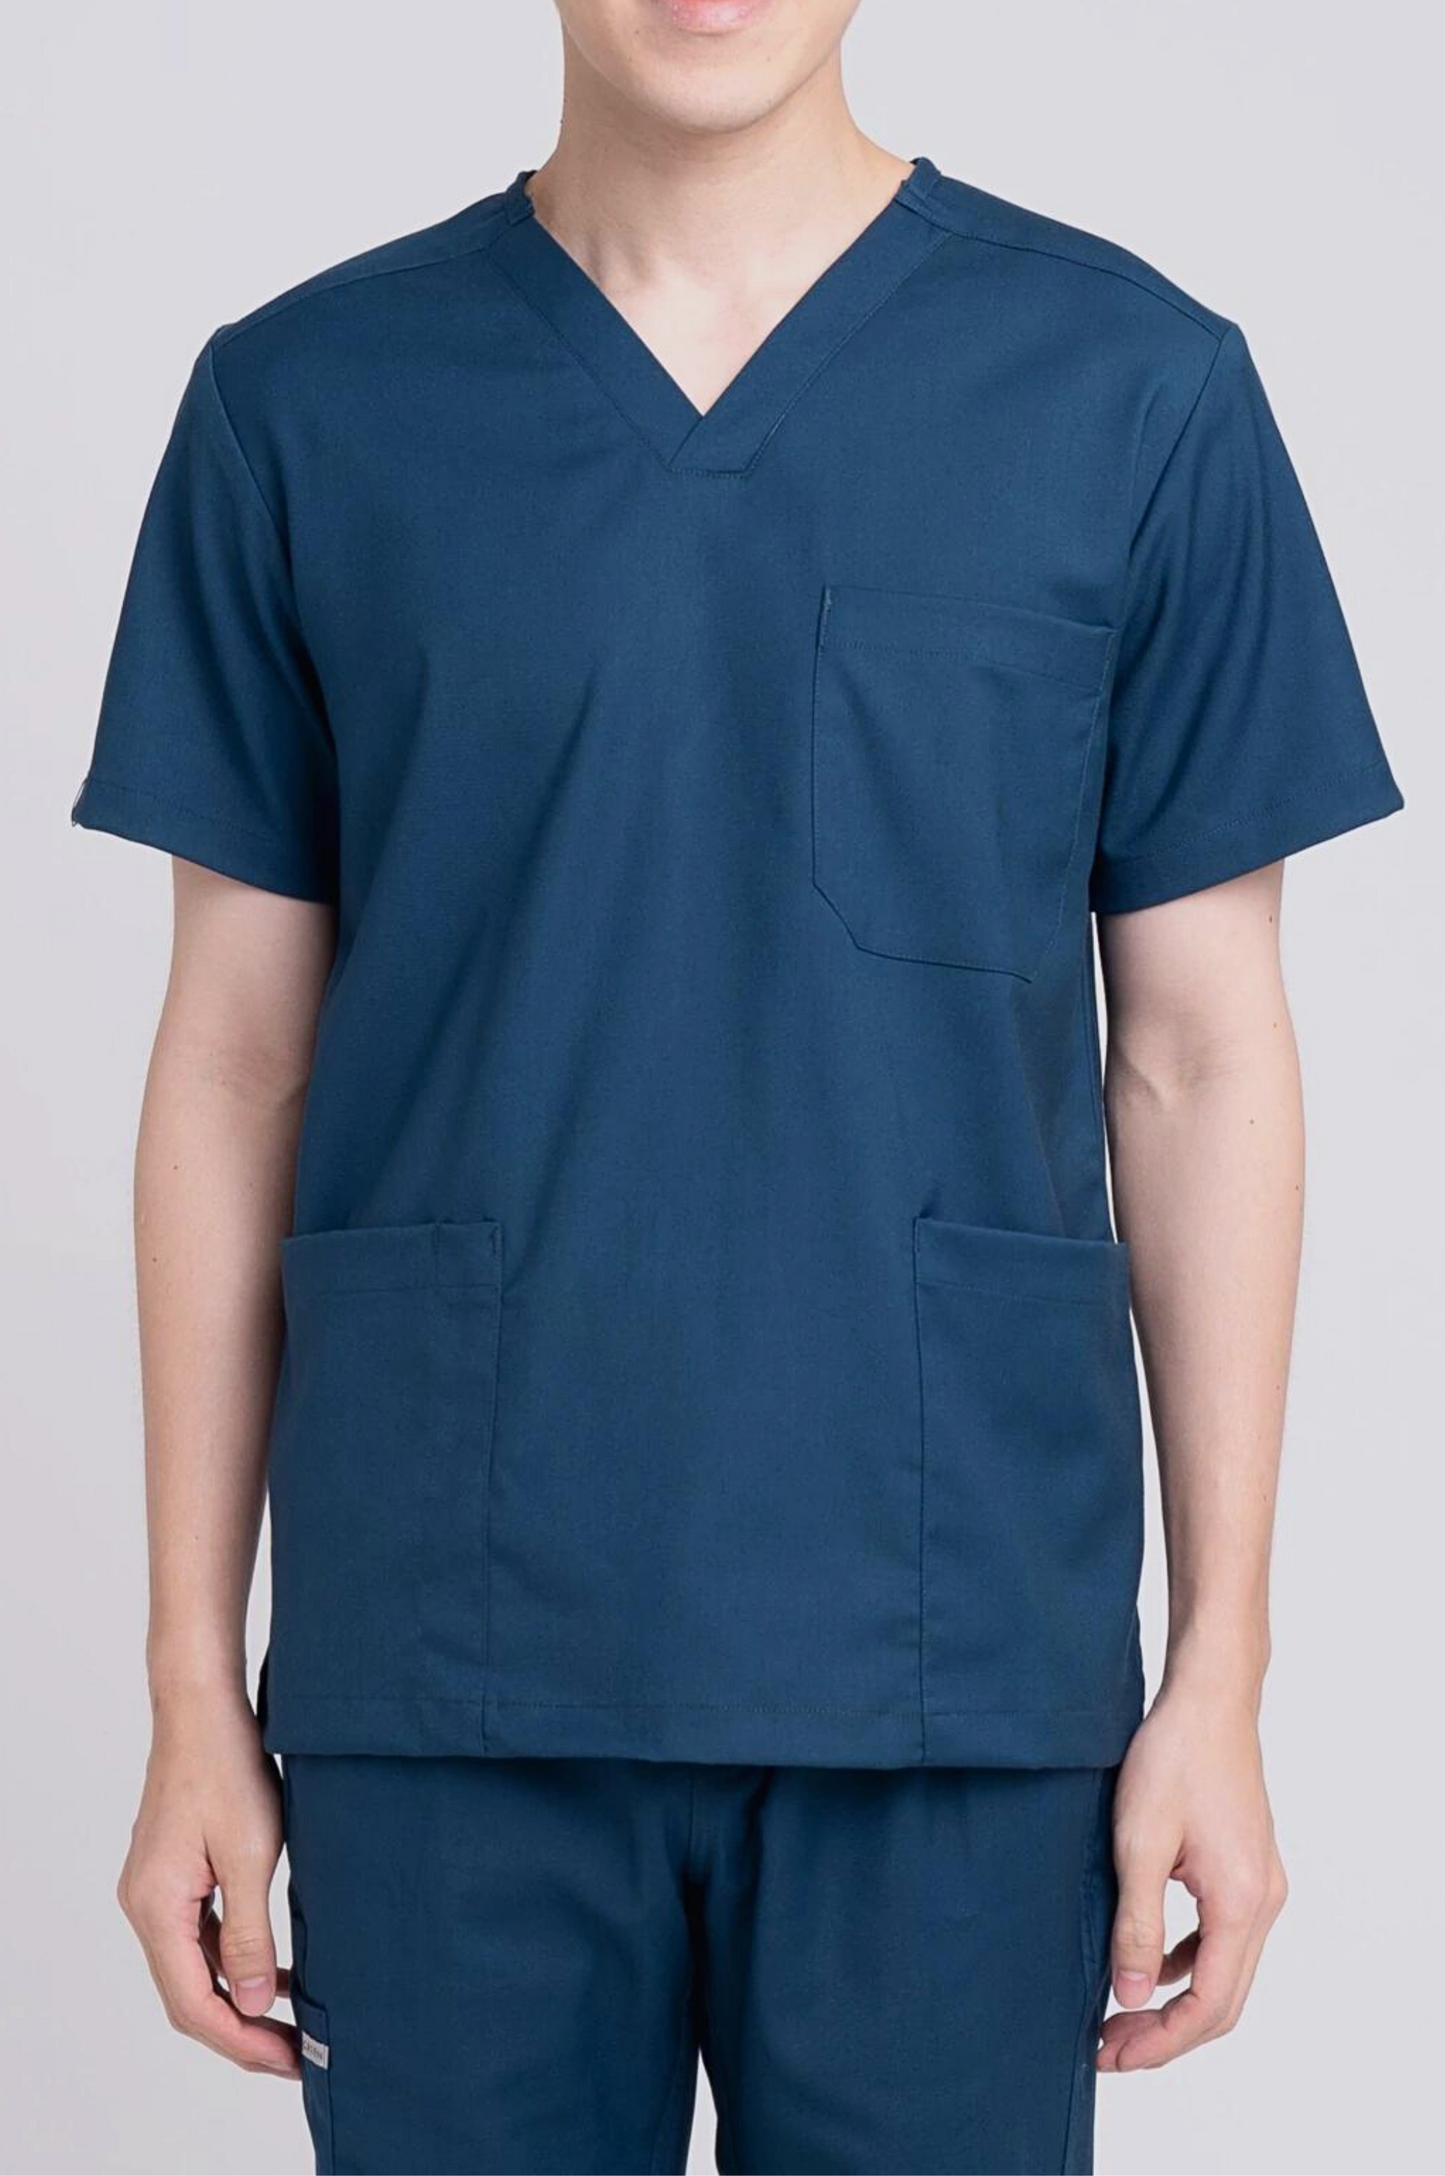 Teal Medical Scrub Top, Front View